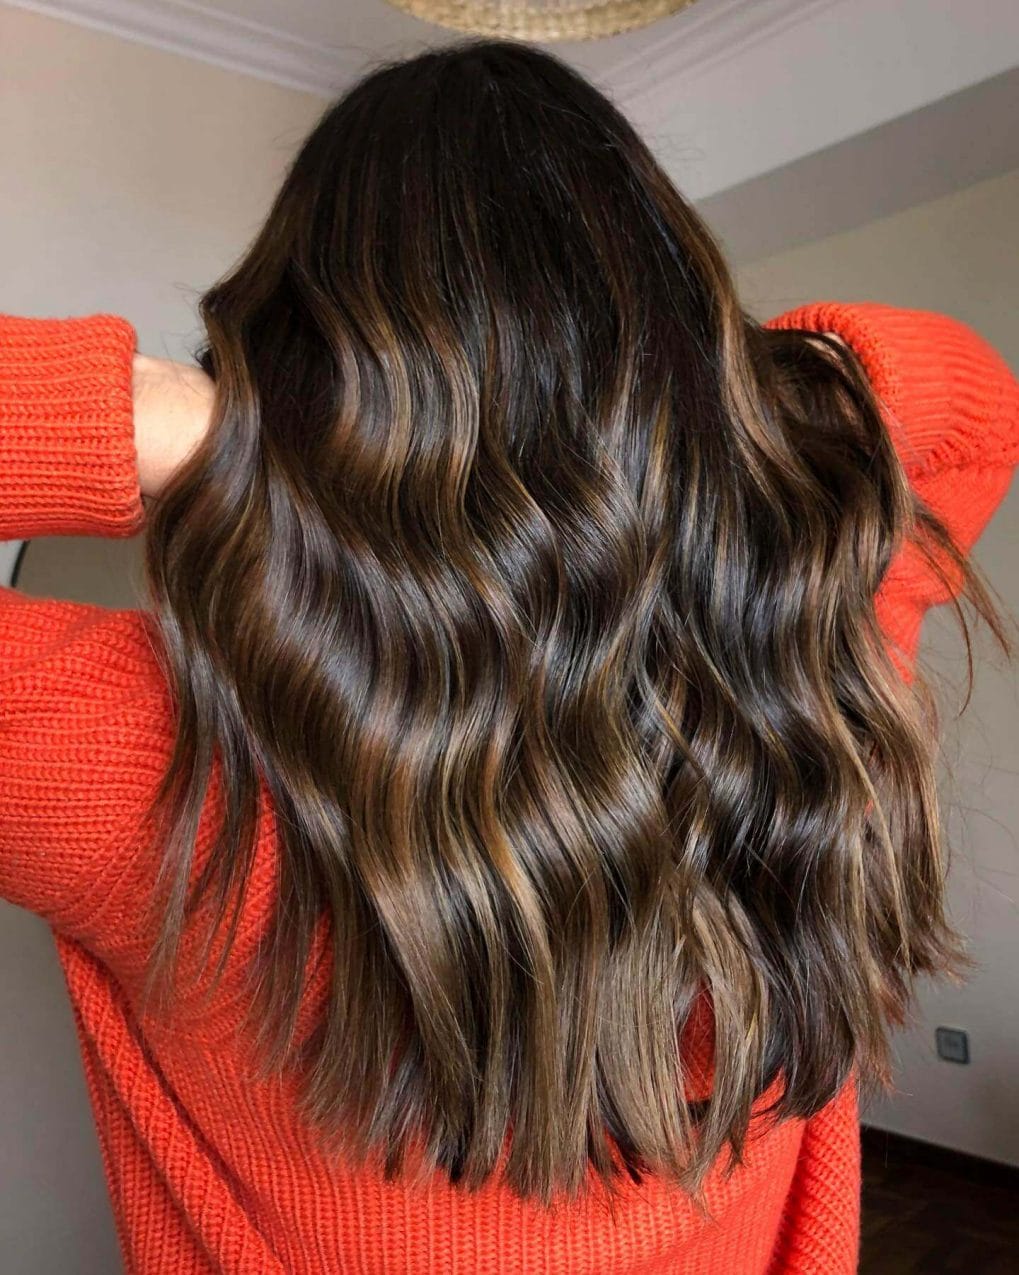 Cascading waves in espresso to hazelnut balayage, embodying the contrast of a winter evening.